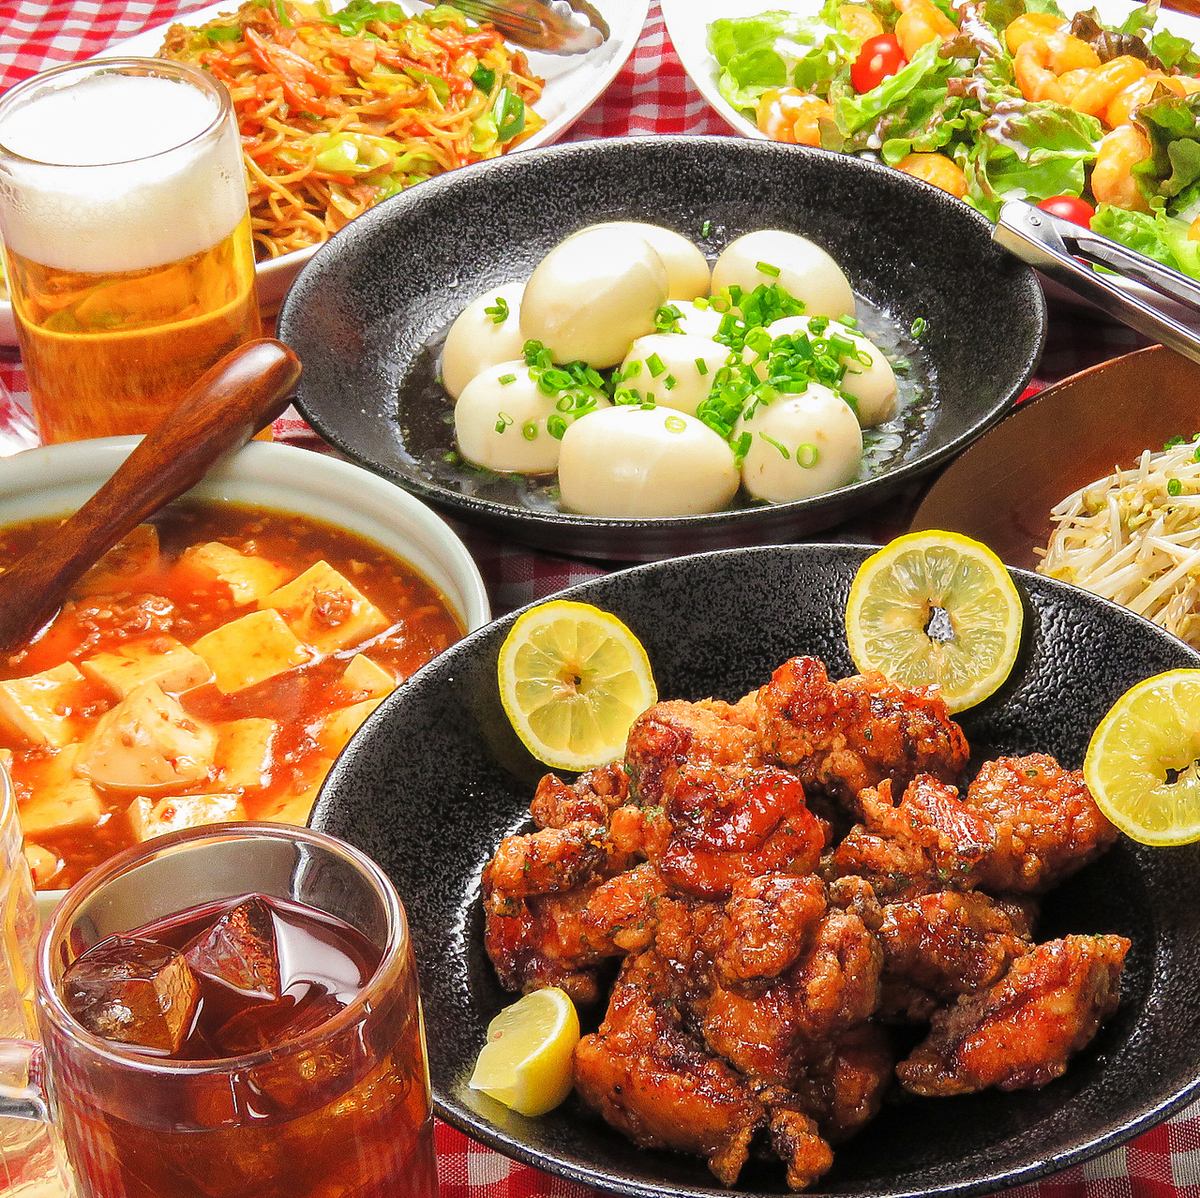 Enjoy draft beer! All-you-can-eat and drink plans start from 3,500 yen